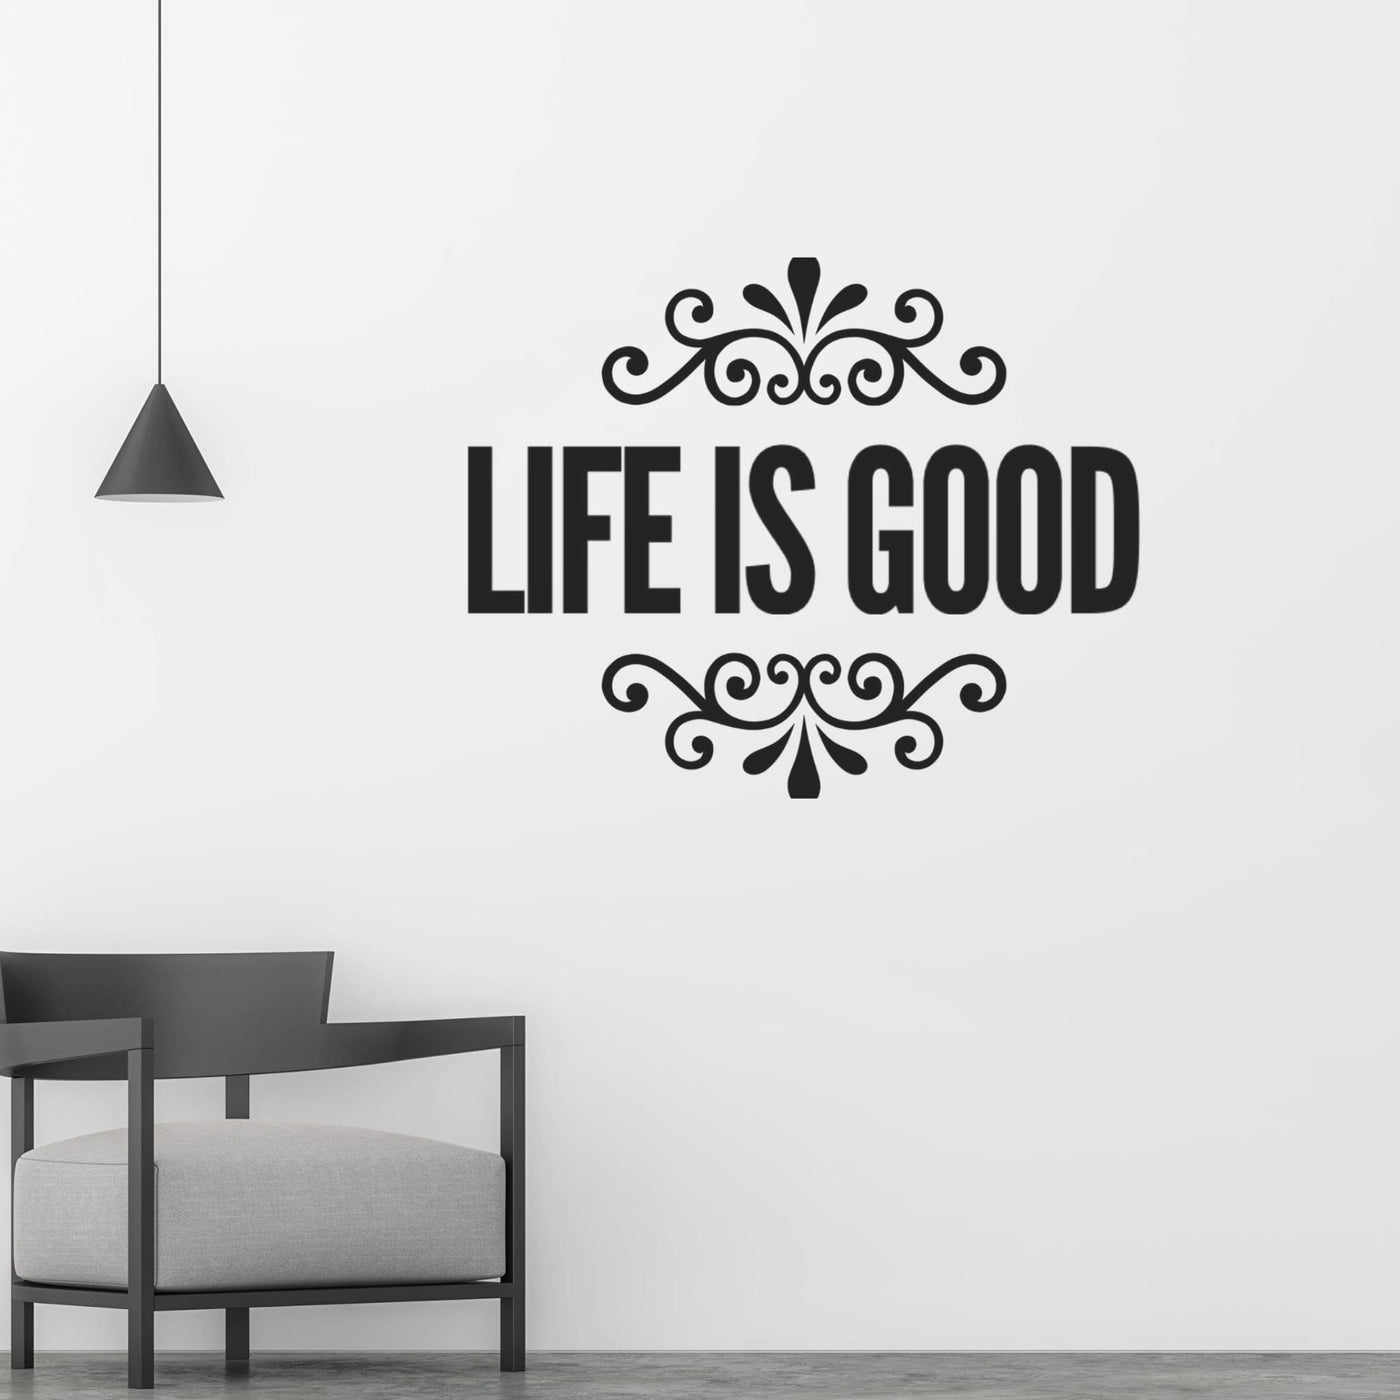 Decor - Life Is Good Removable Vinyl Wall Decal Easy Peel And Stick Wall Art